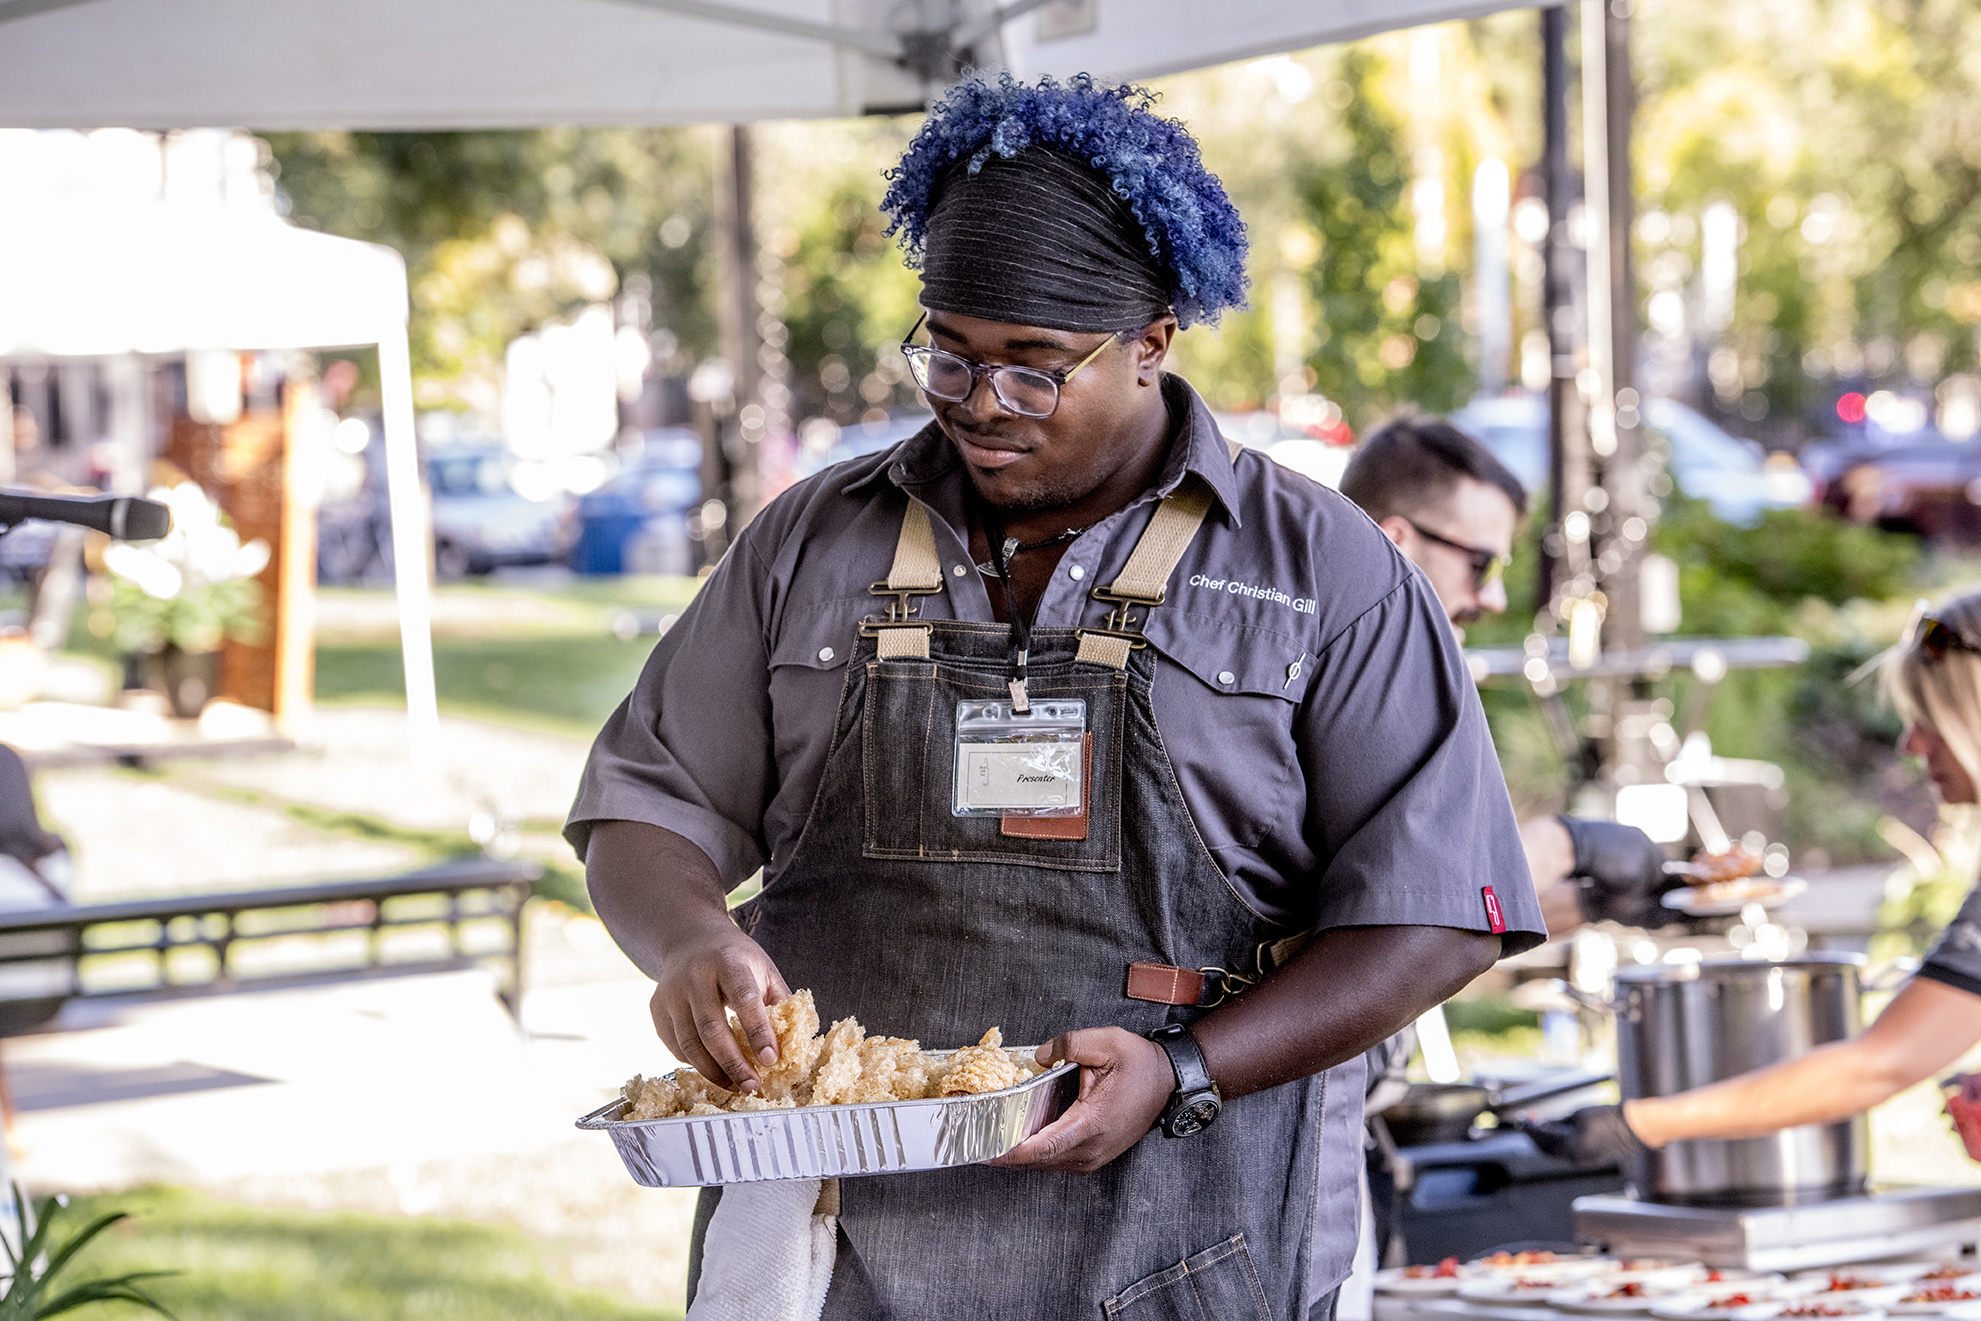  Photo of Christian Gill as a presenter at  Bourbon in the Park  in Washington Park. || Image:  Twin Spire Photography  - Published: 10.9.2019 